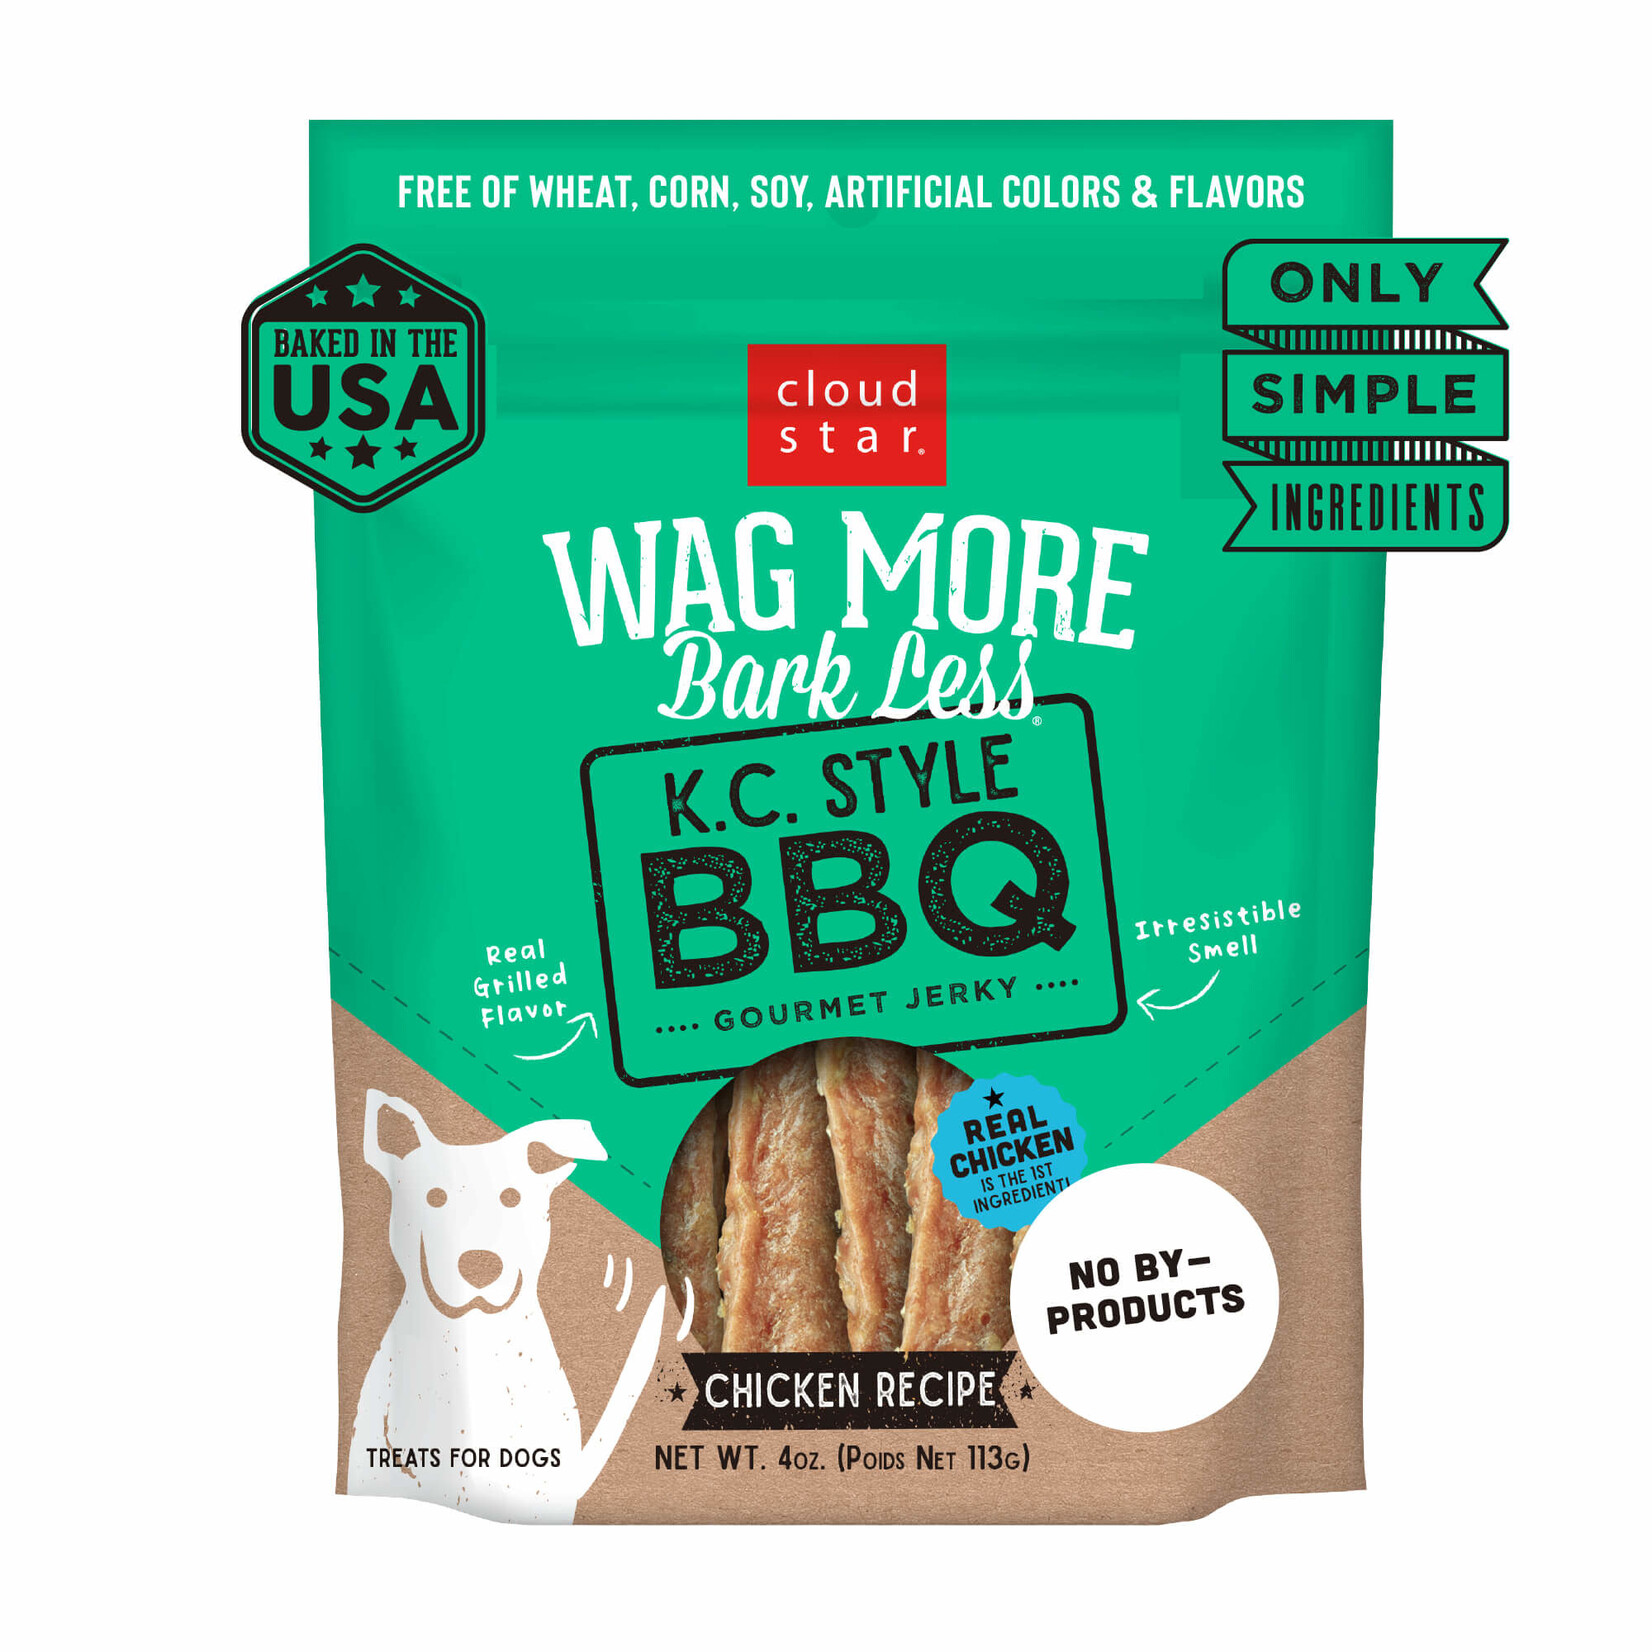 Wag More Bark Less Jerky: K.C. Style BBQ